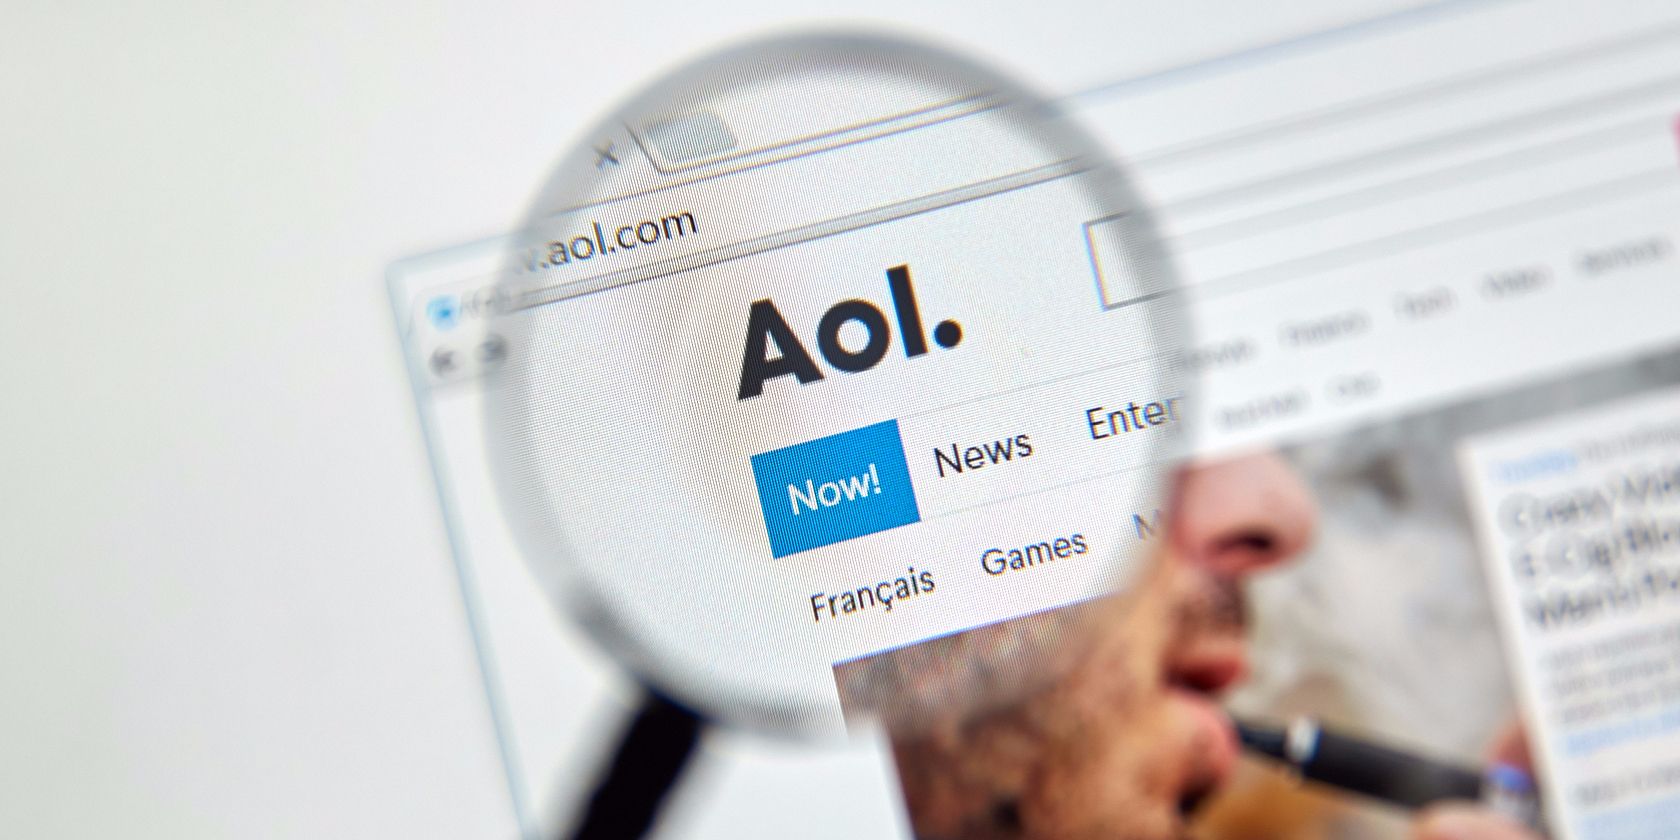 How to Whitelist Email Addresses in AOL | MakeUseOf